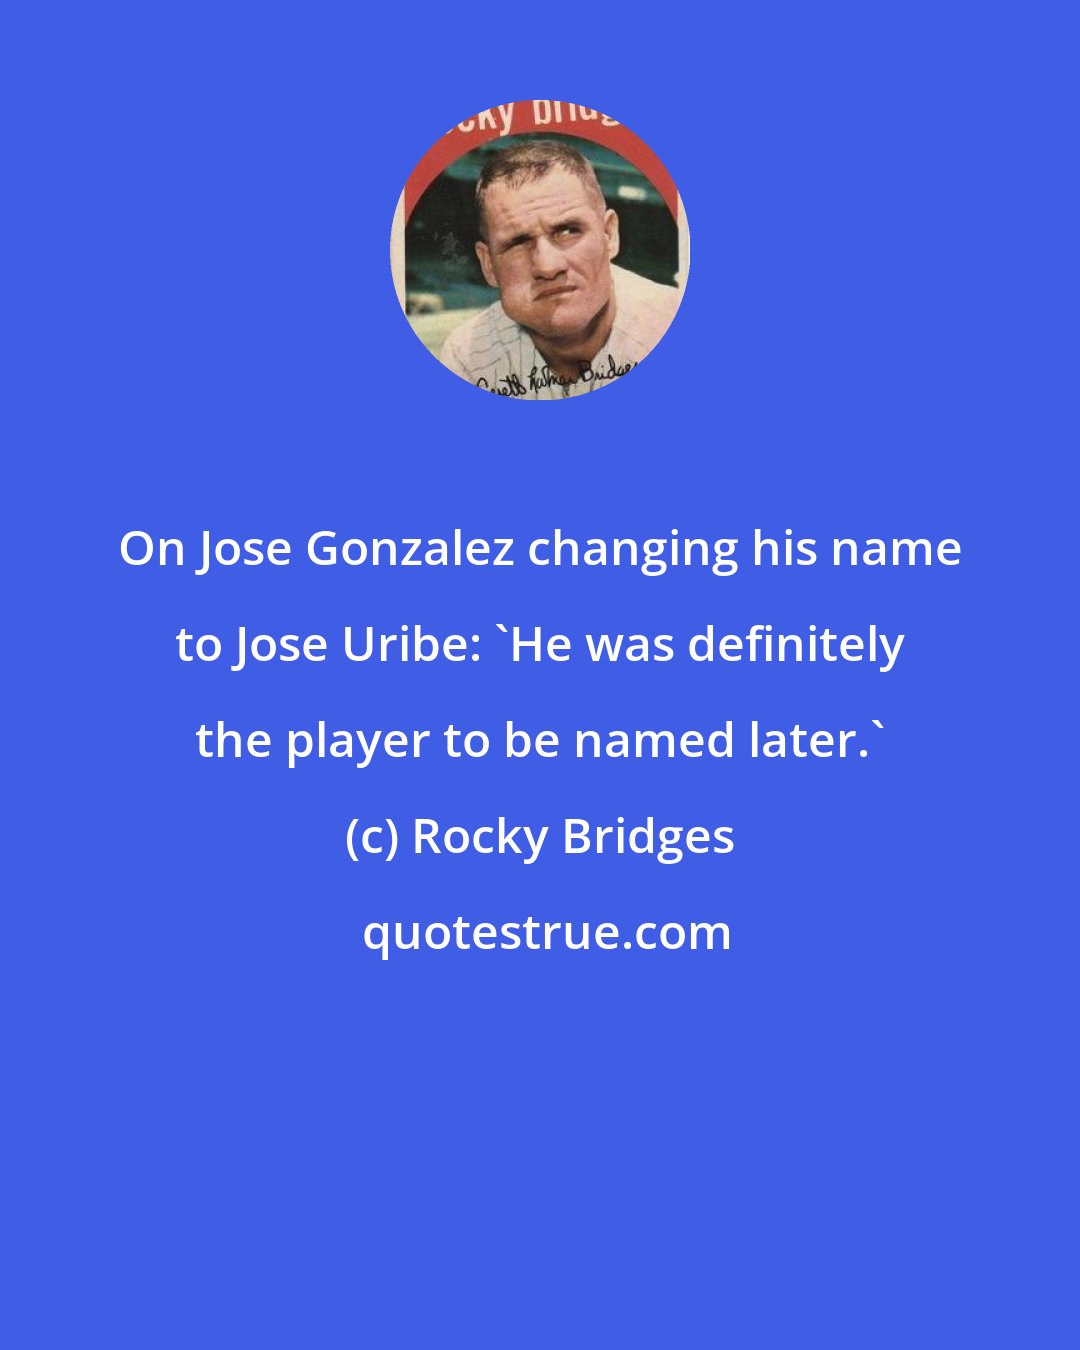 Rocky Bridges: On Jose Gonzalez changing his name to Jose Uribe: 'He was definitely the player to be named later.'